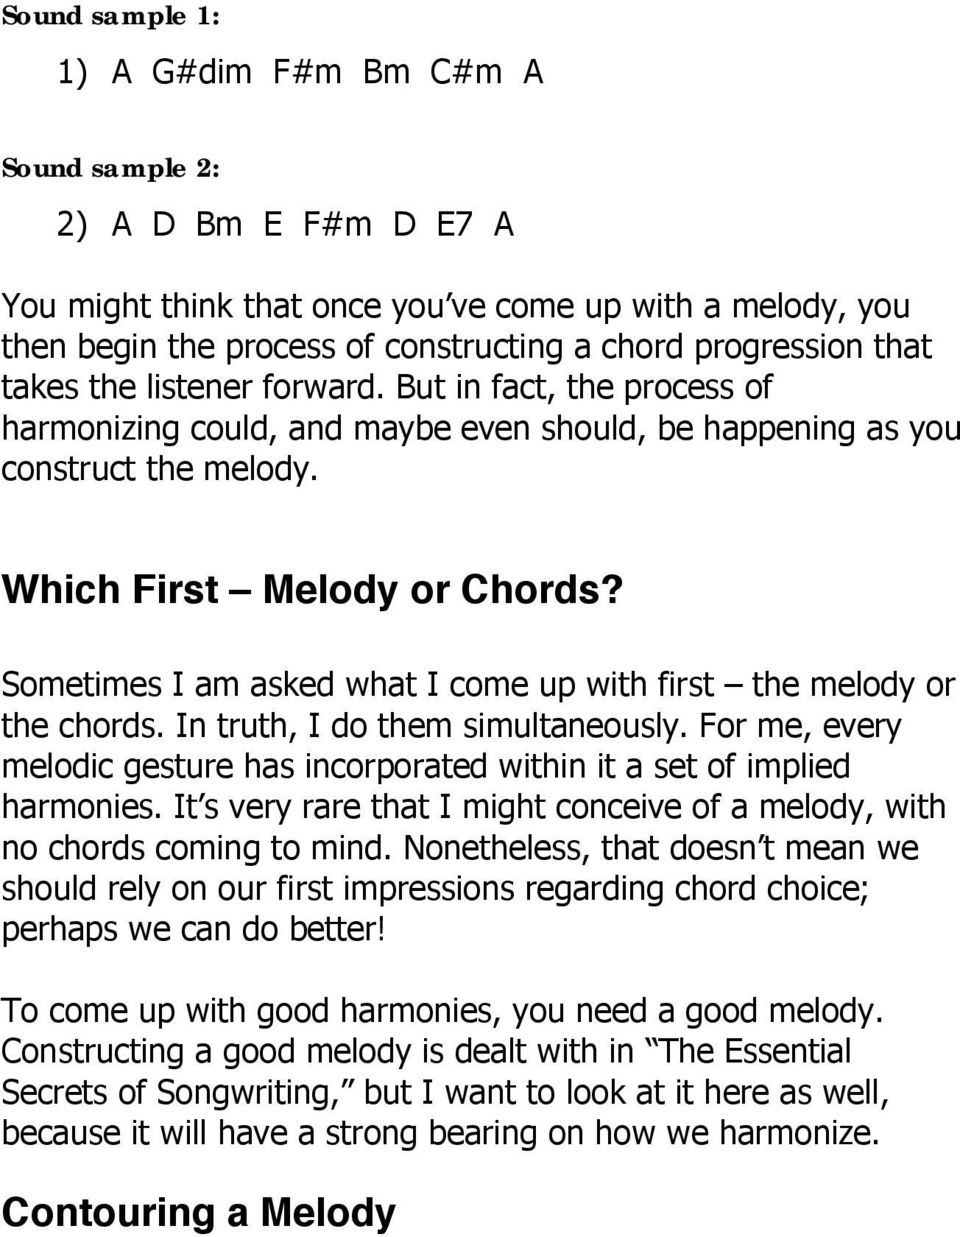 Sometimes I am asked what I come up with first the melody or the chords. In truth, I do them simultaneously. For me, every melodic gesture has incorporated within it a set of implied harmonies.